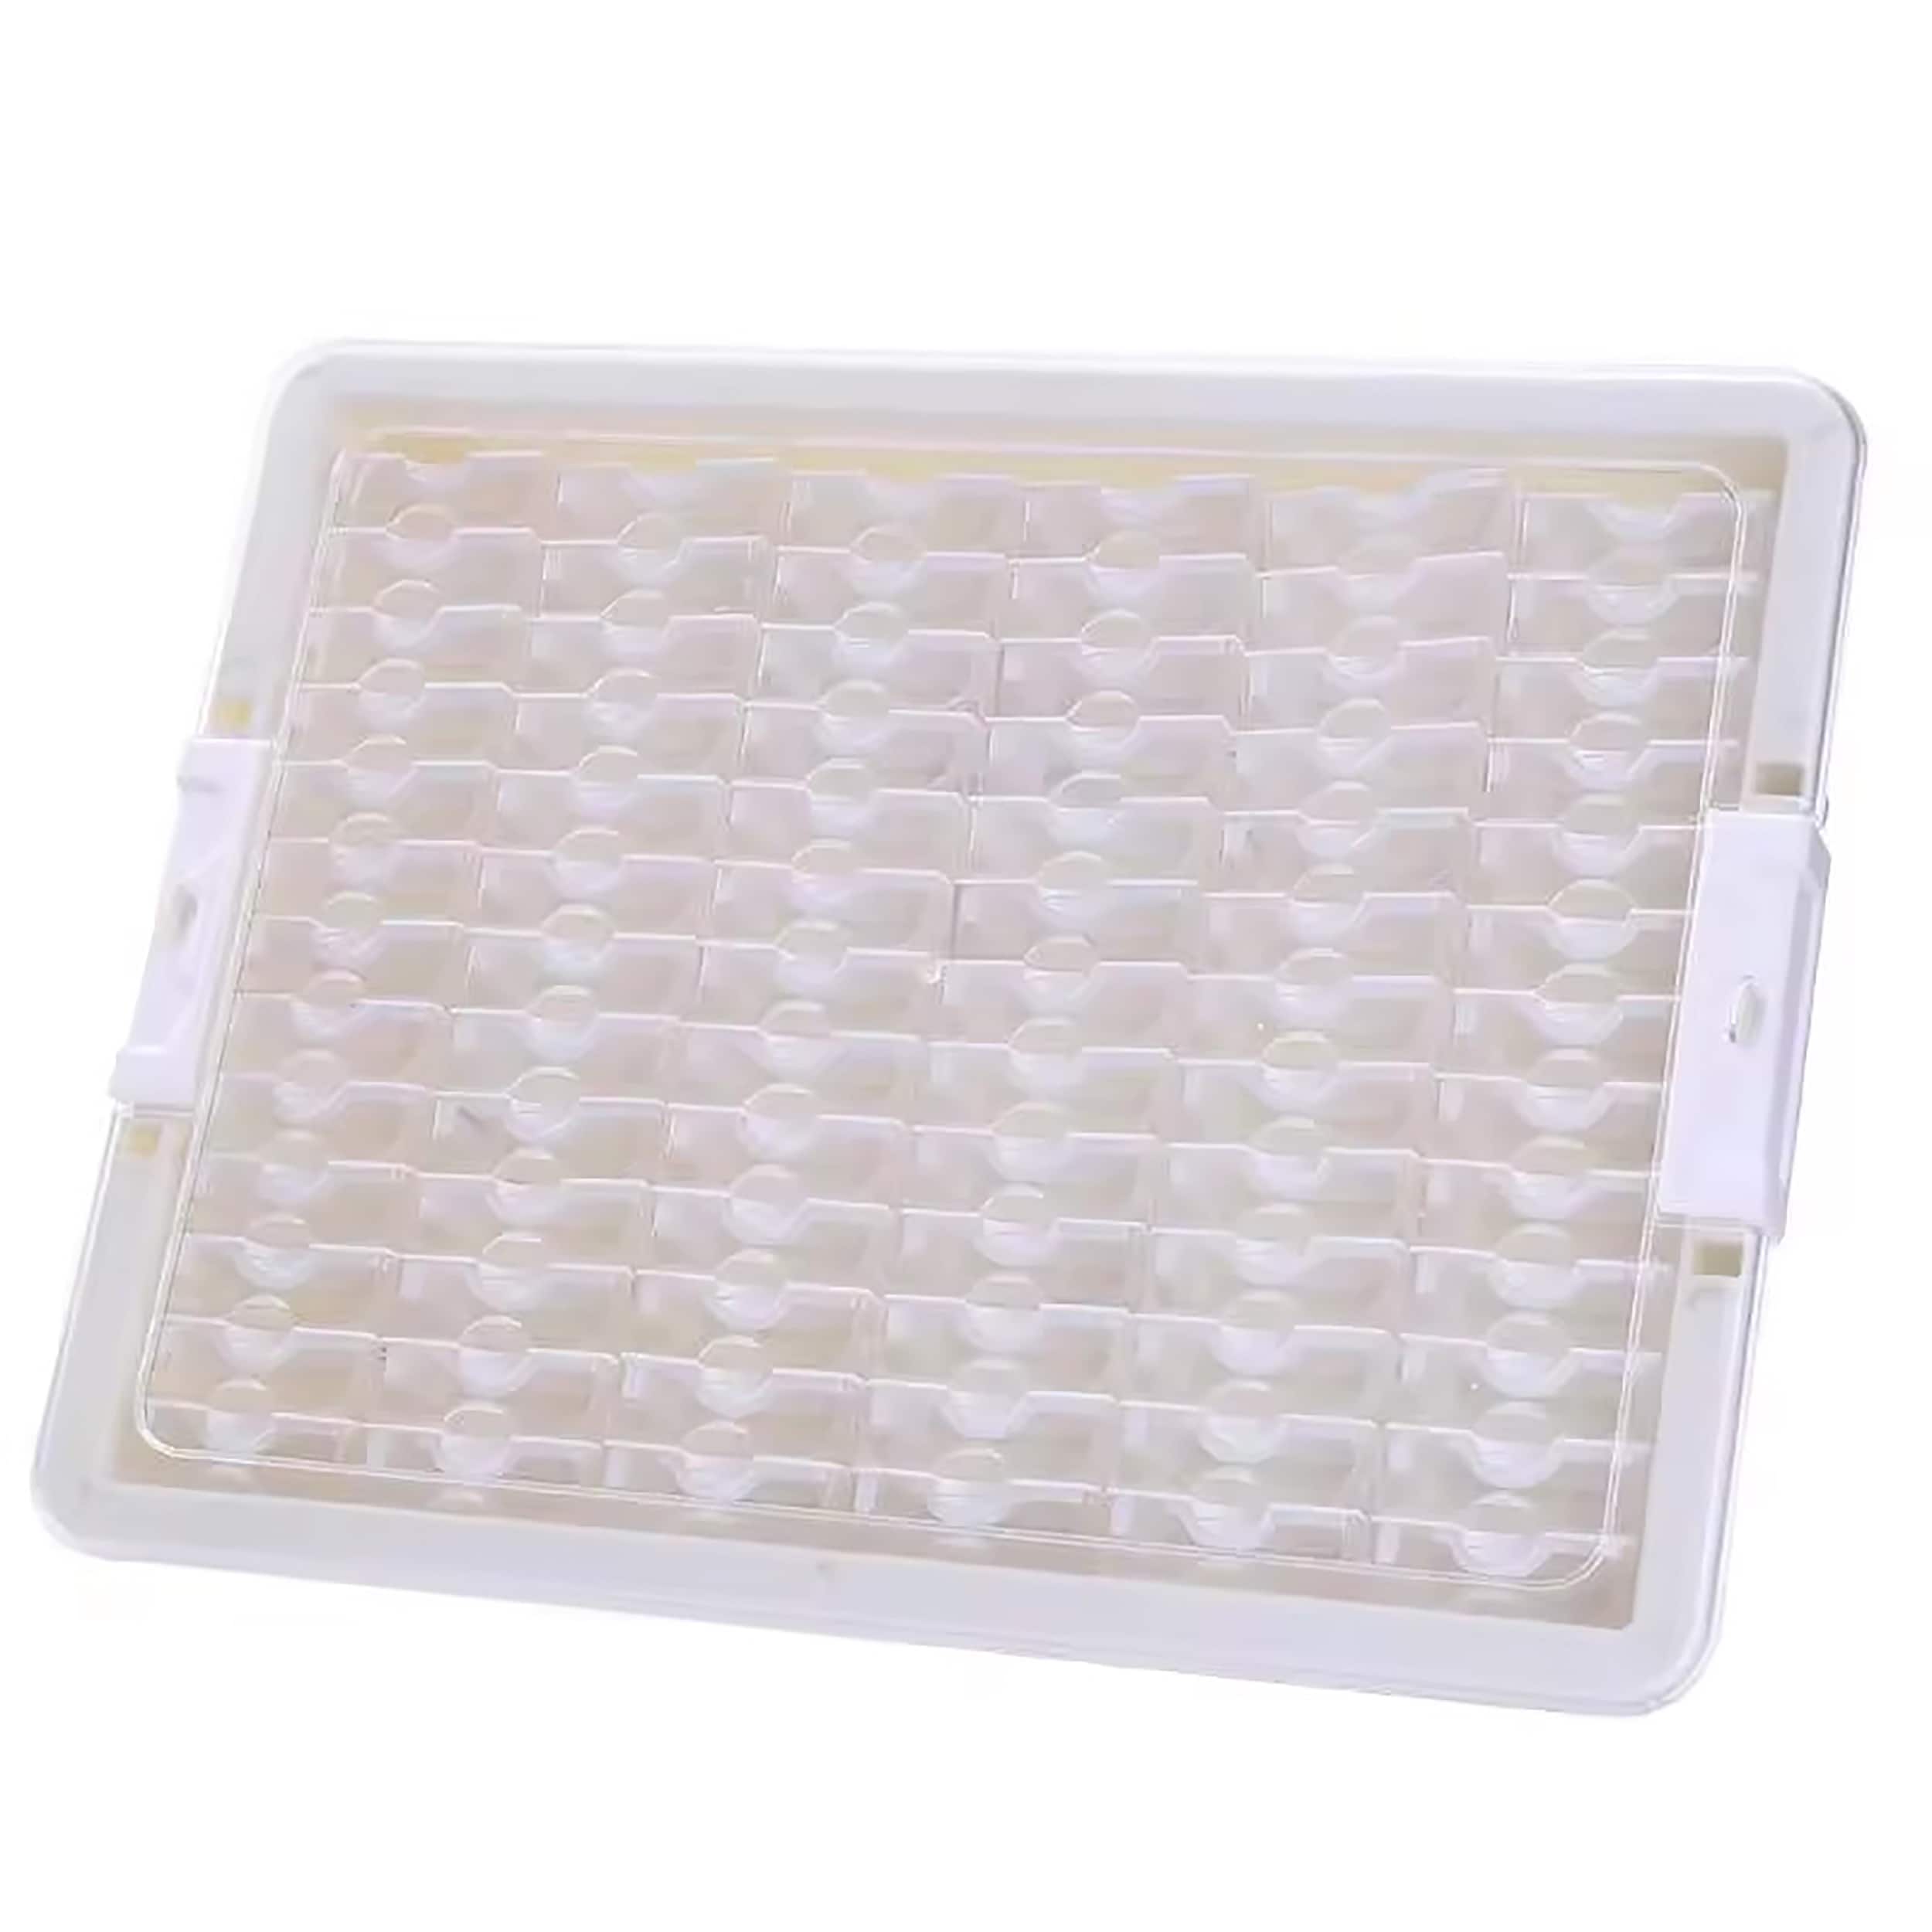 Sparkly Selections White Diamond Storage Box with 78 Compartment Bottles